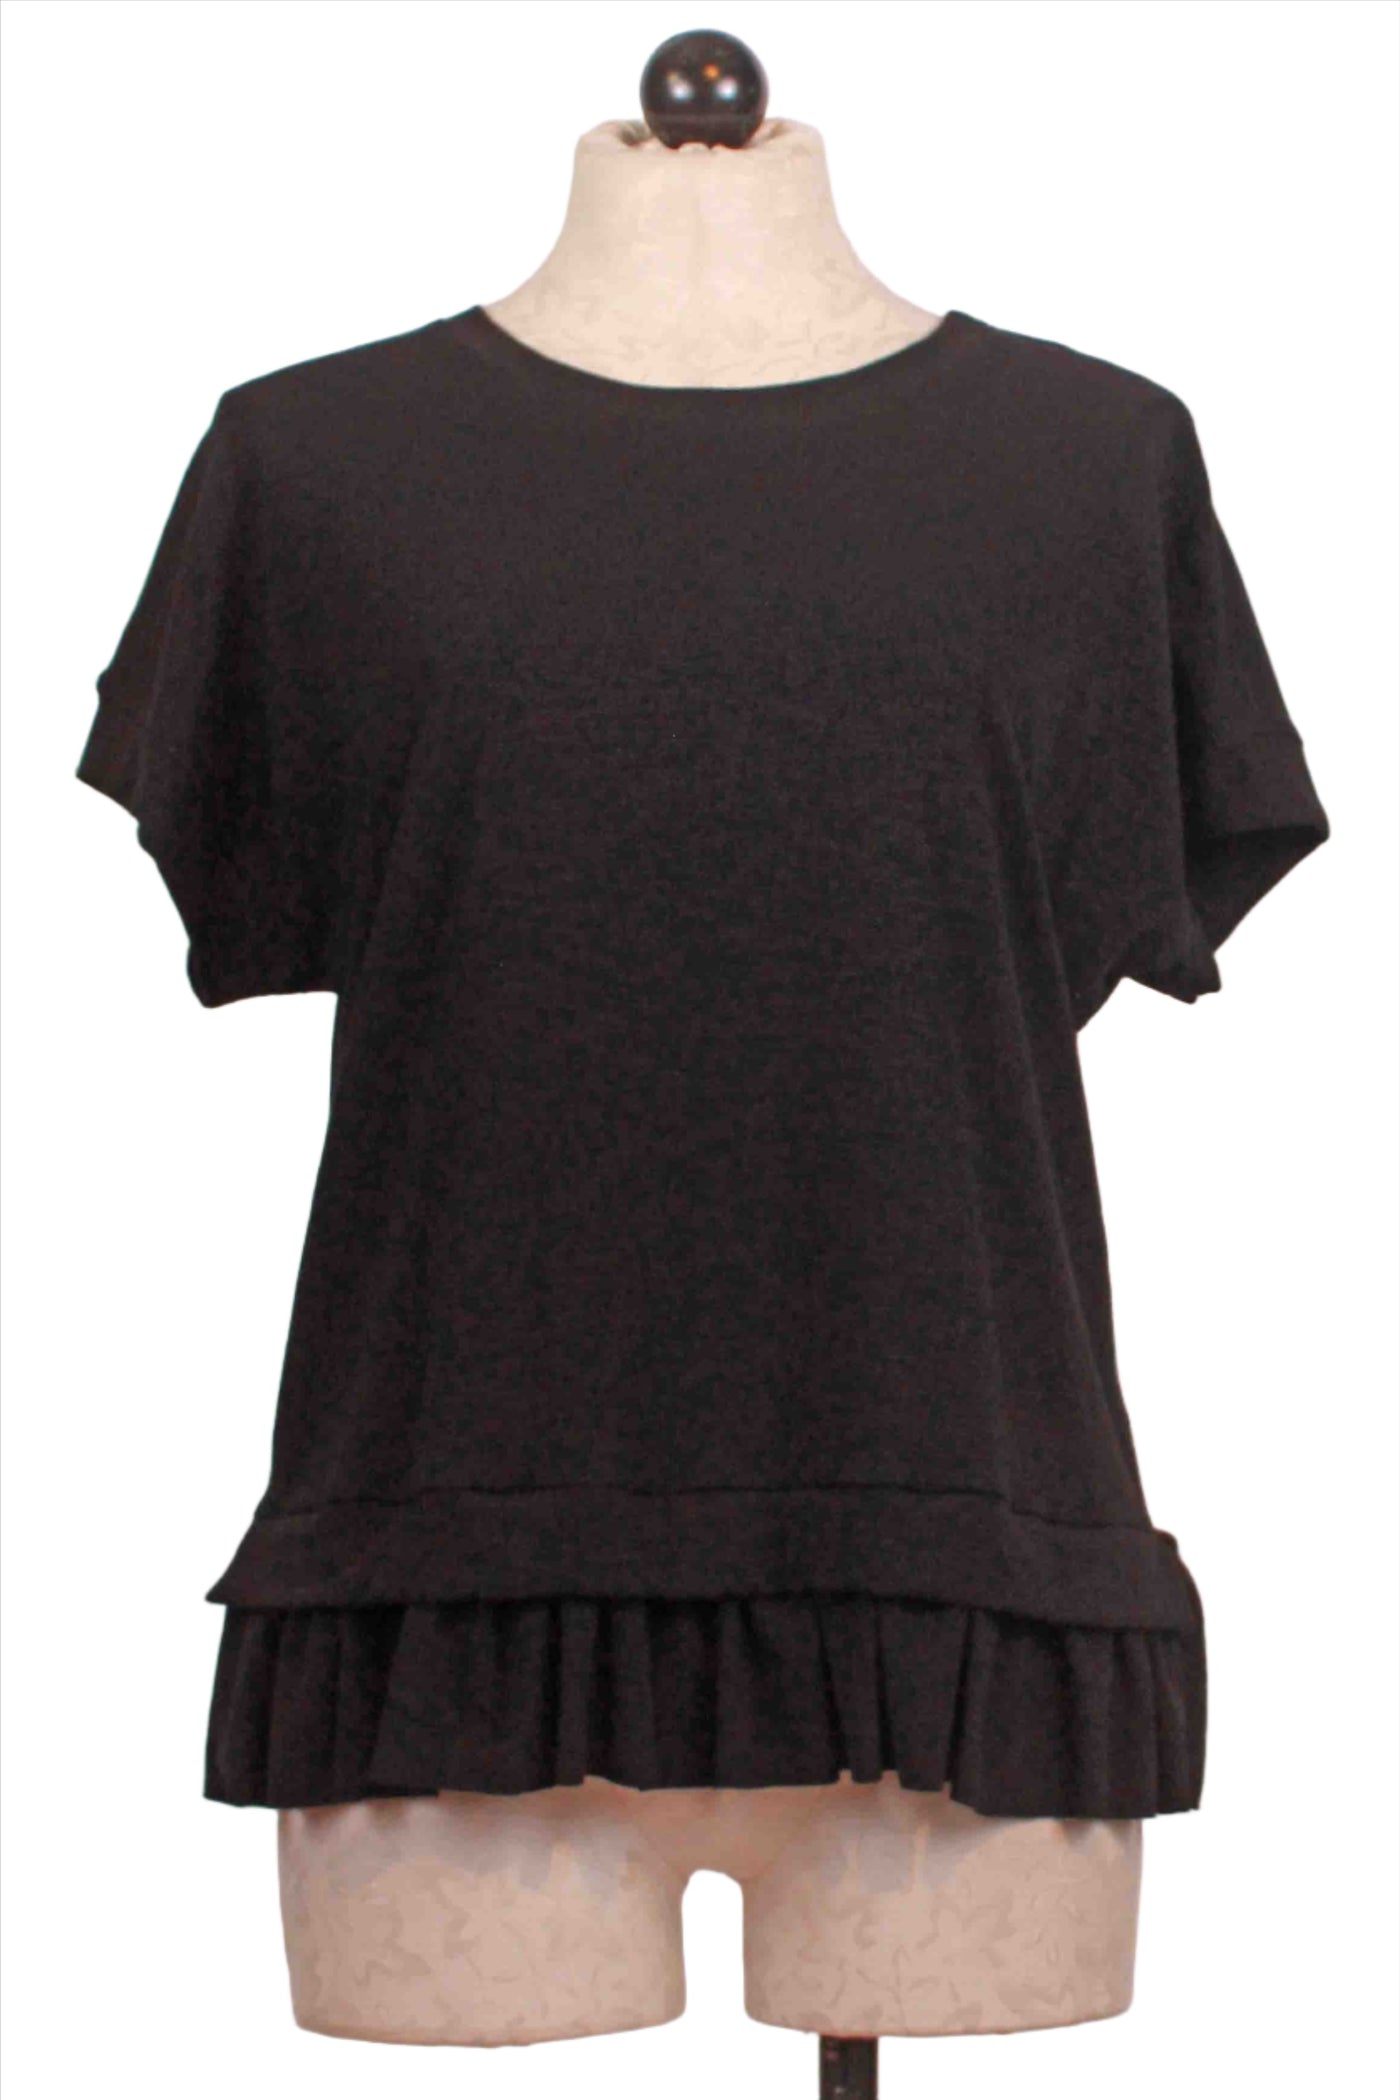 Black Short Sleeve Ruffle Bottom Top by Nally and Millie